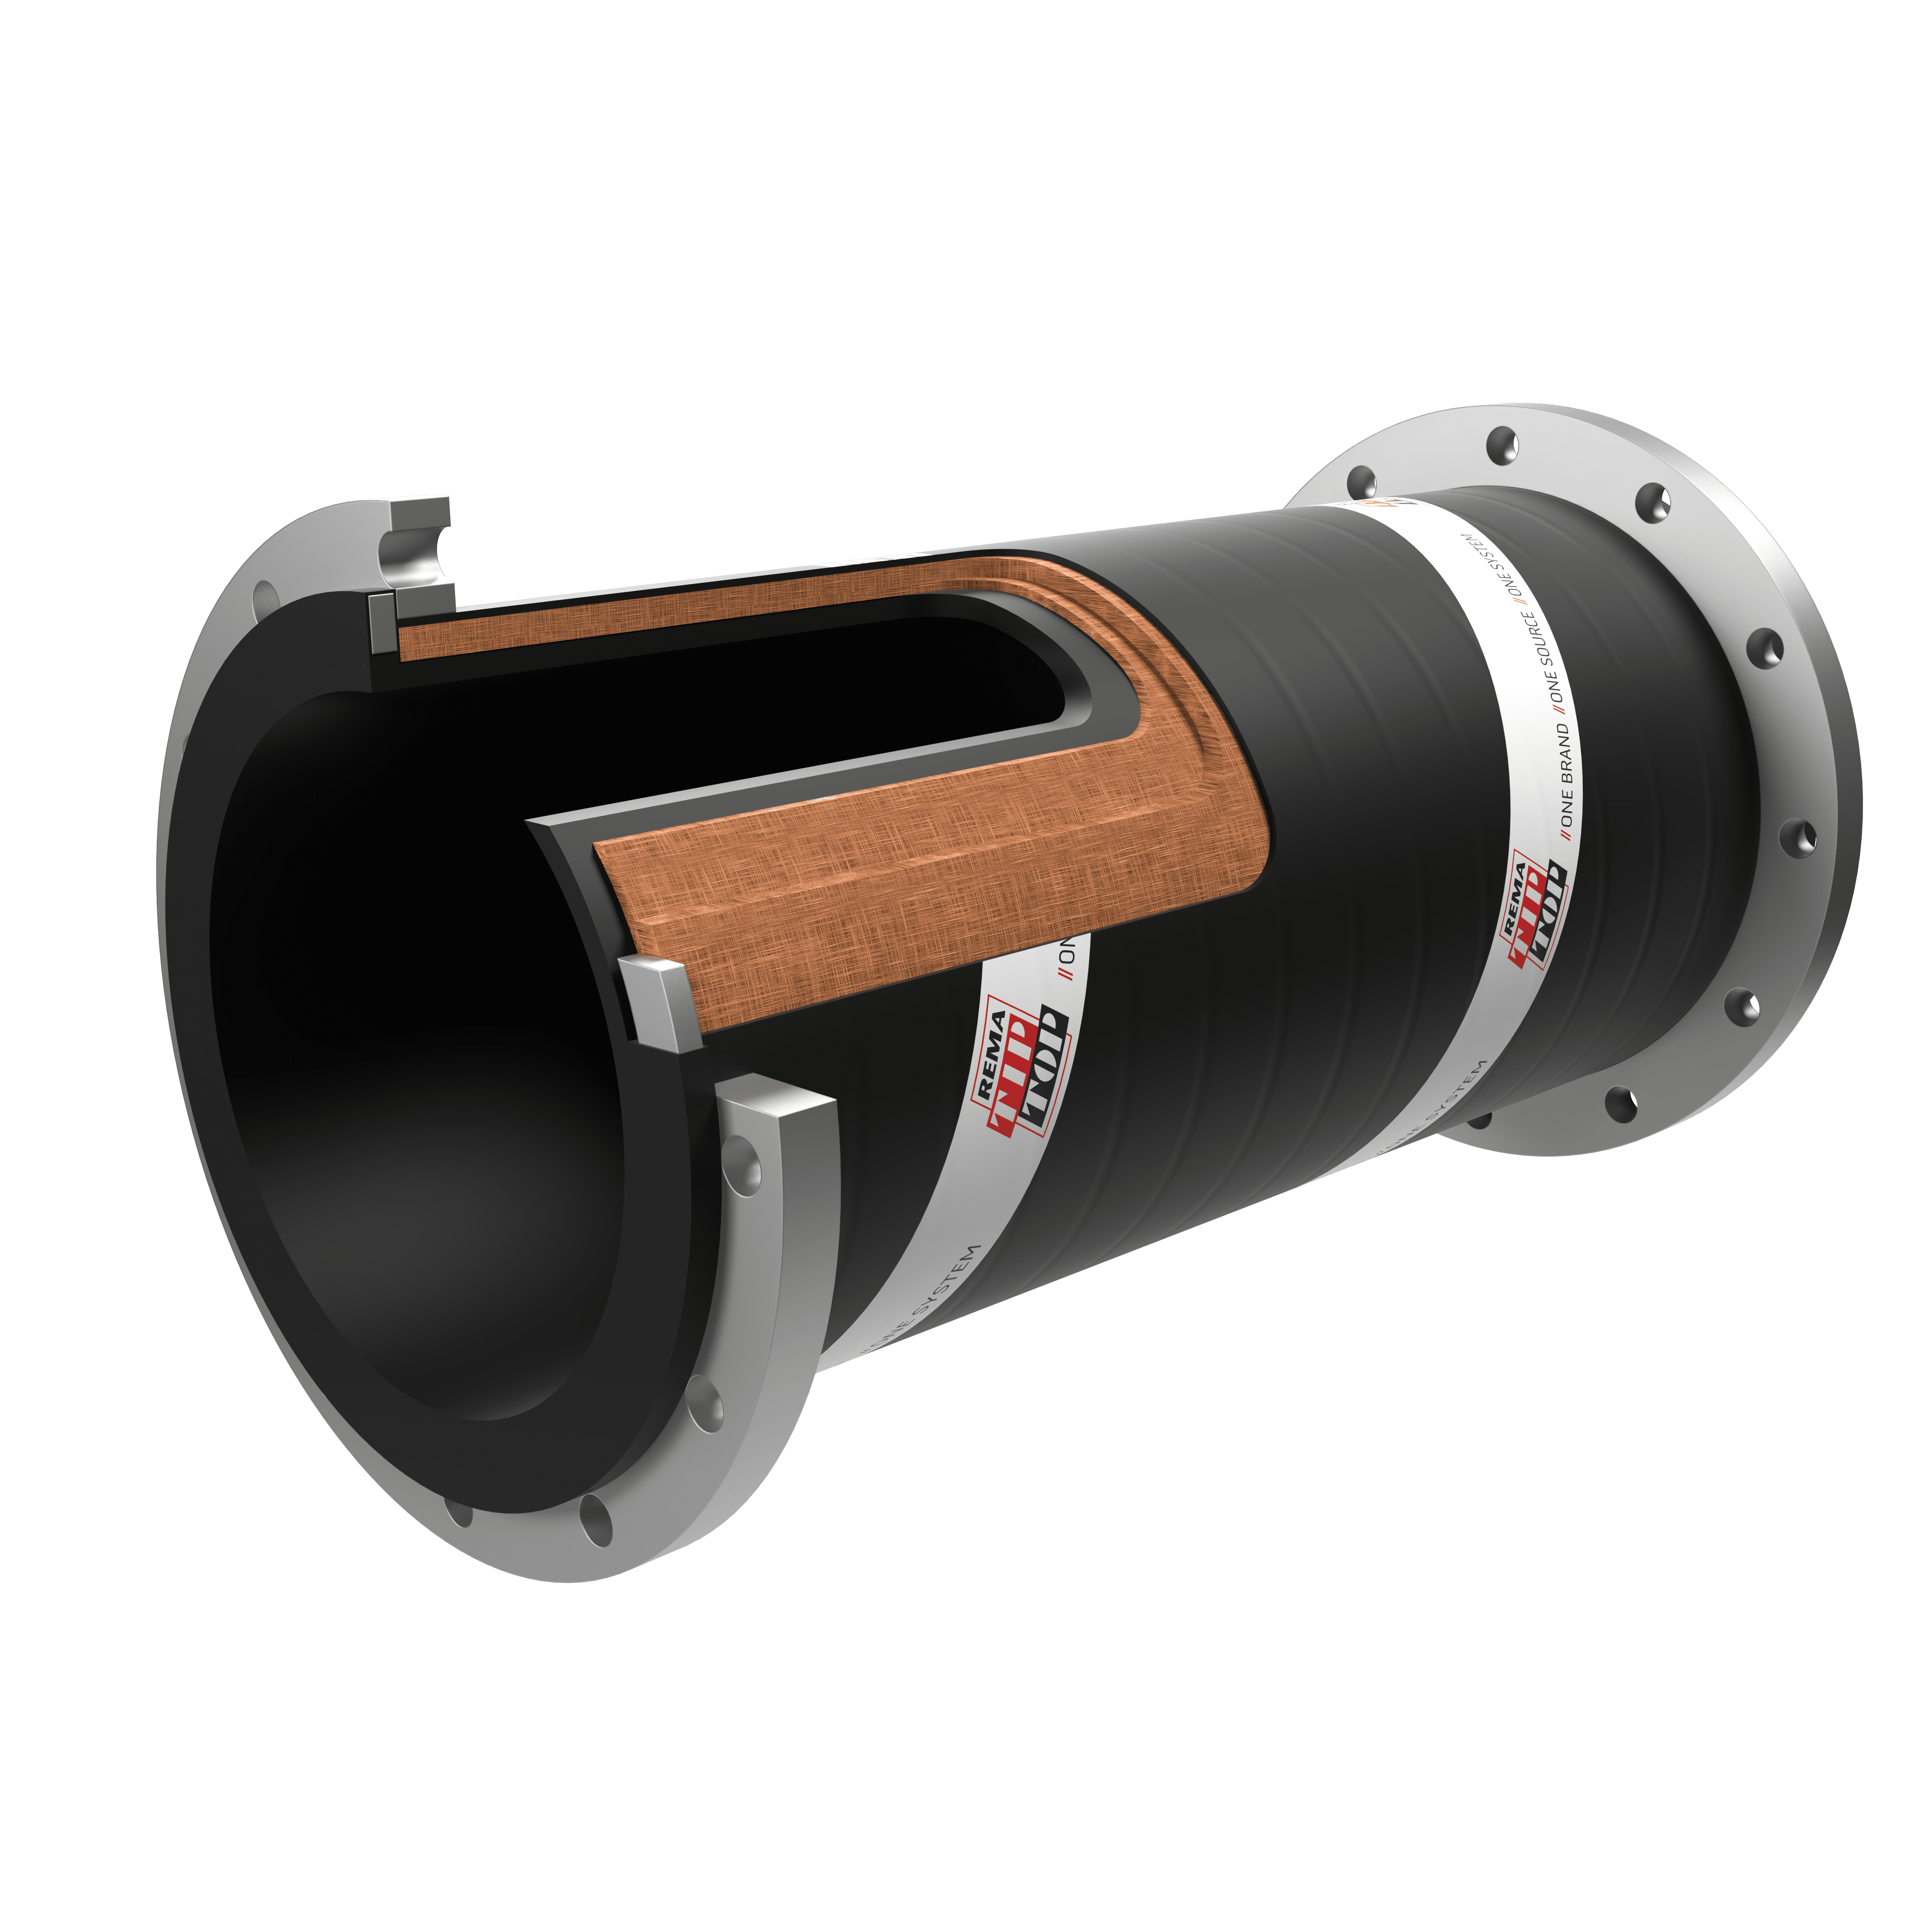 Cross-sectional view of a soft wall delivery hose with metal flanges at both ends, showcasing internal layers and materials including a brown reinforcing layer.